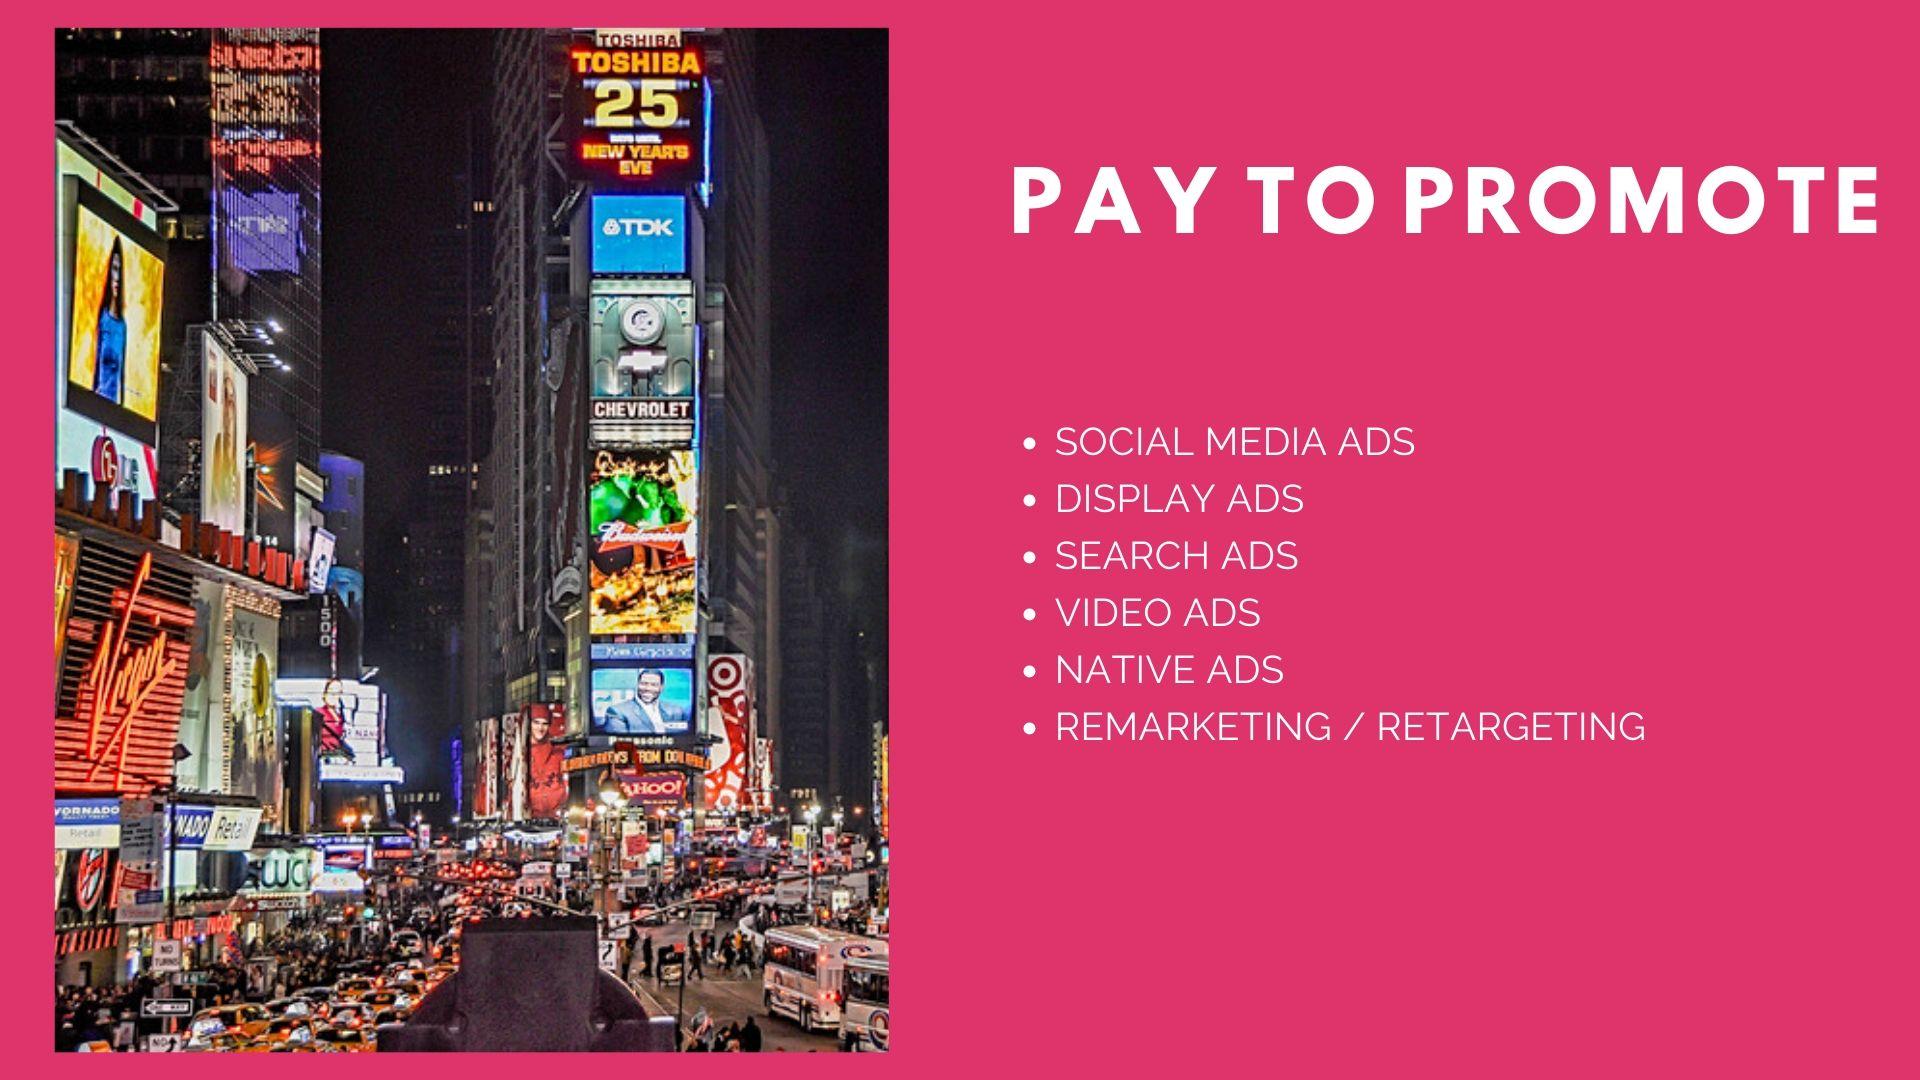 Content - Pay to promote